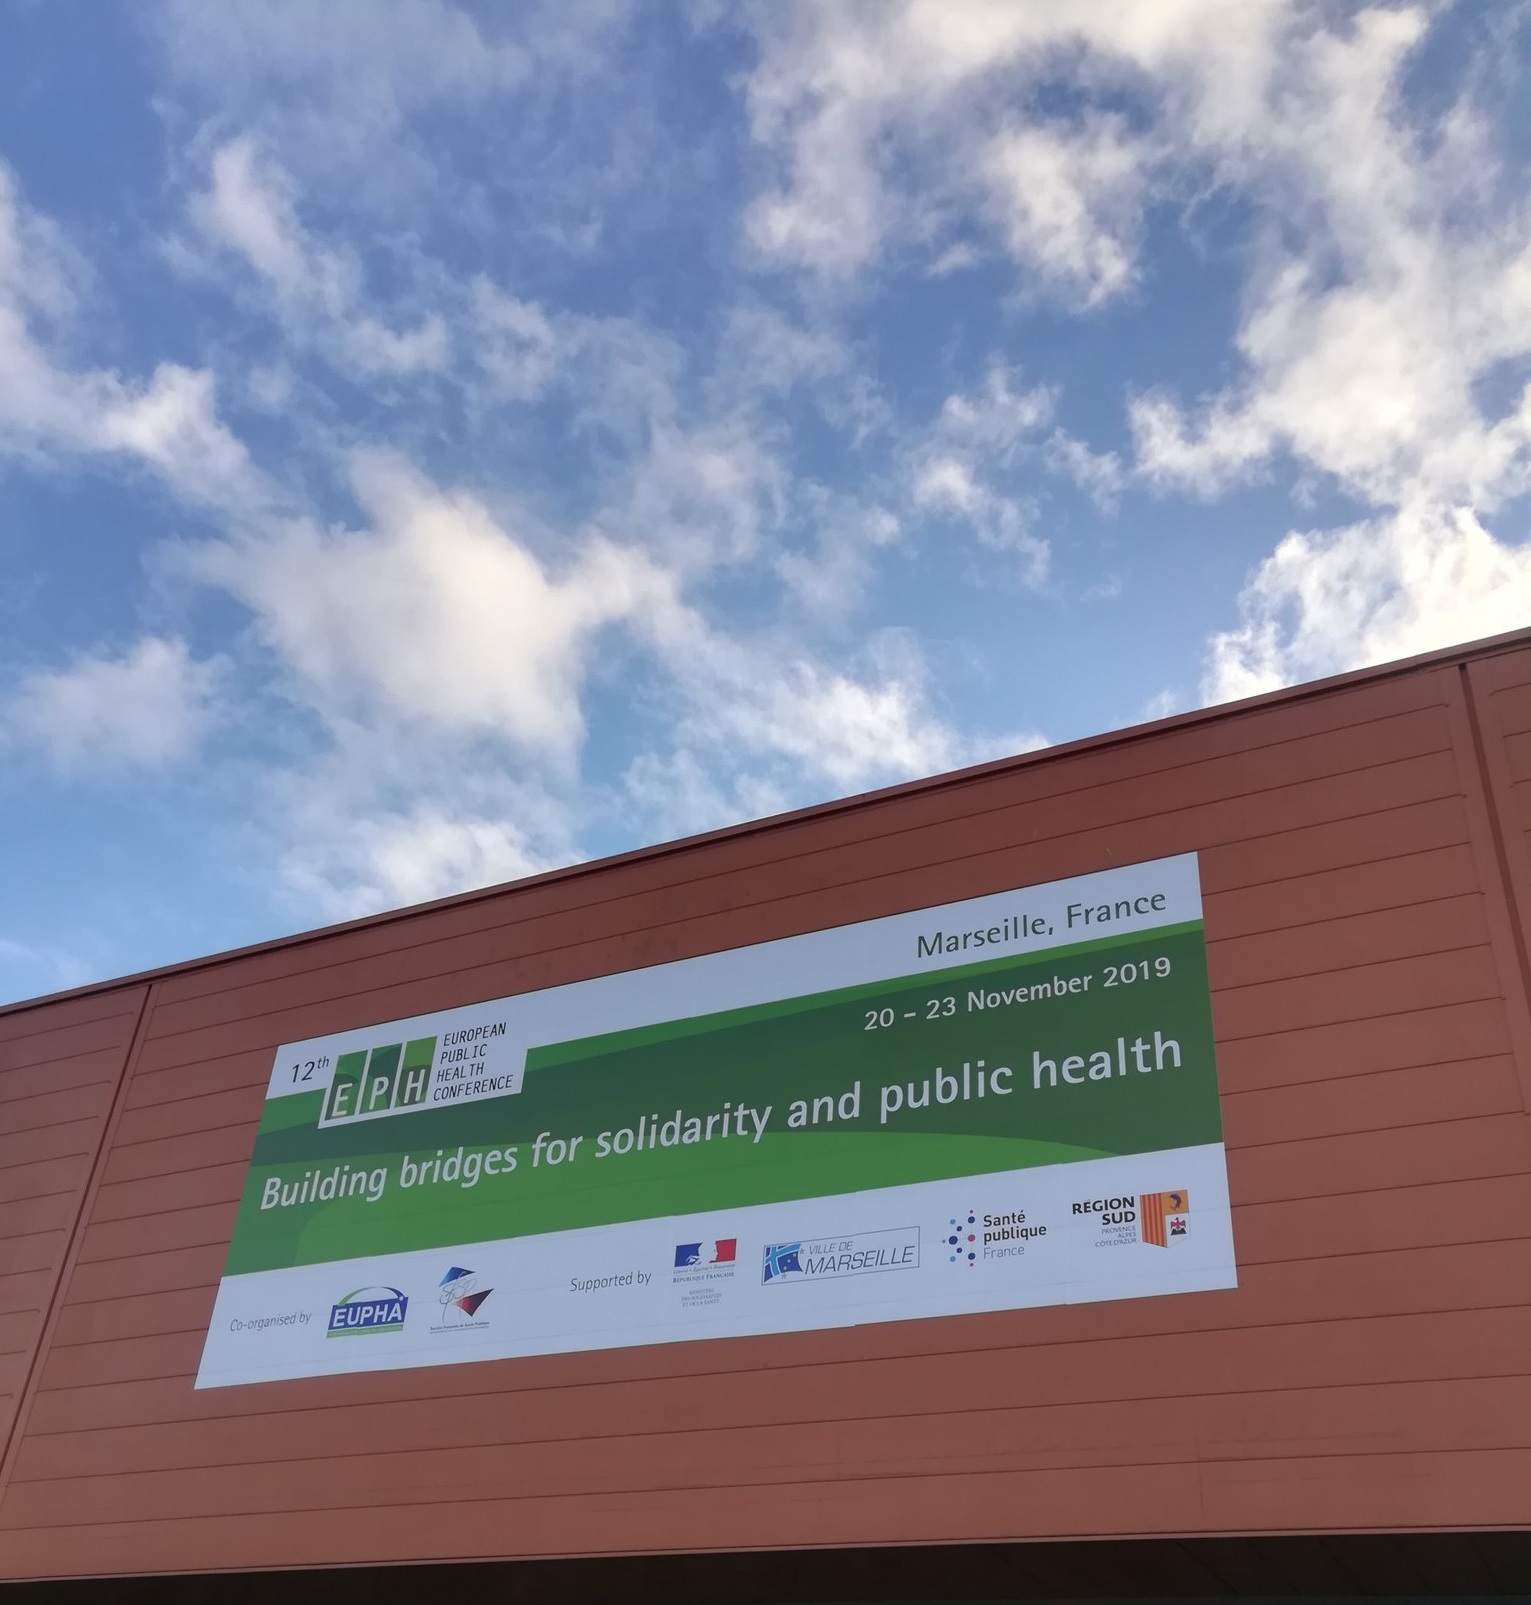 Results of the Equity-LA II project at the 12th European Congress of Public Health in Marseille (France)